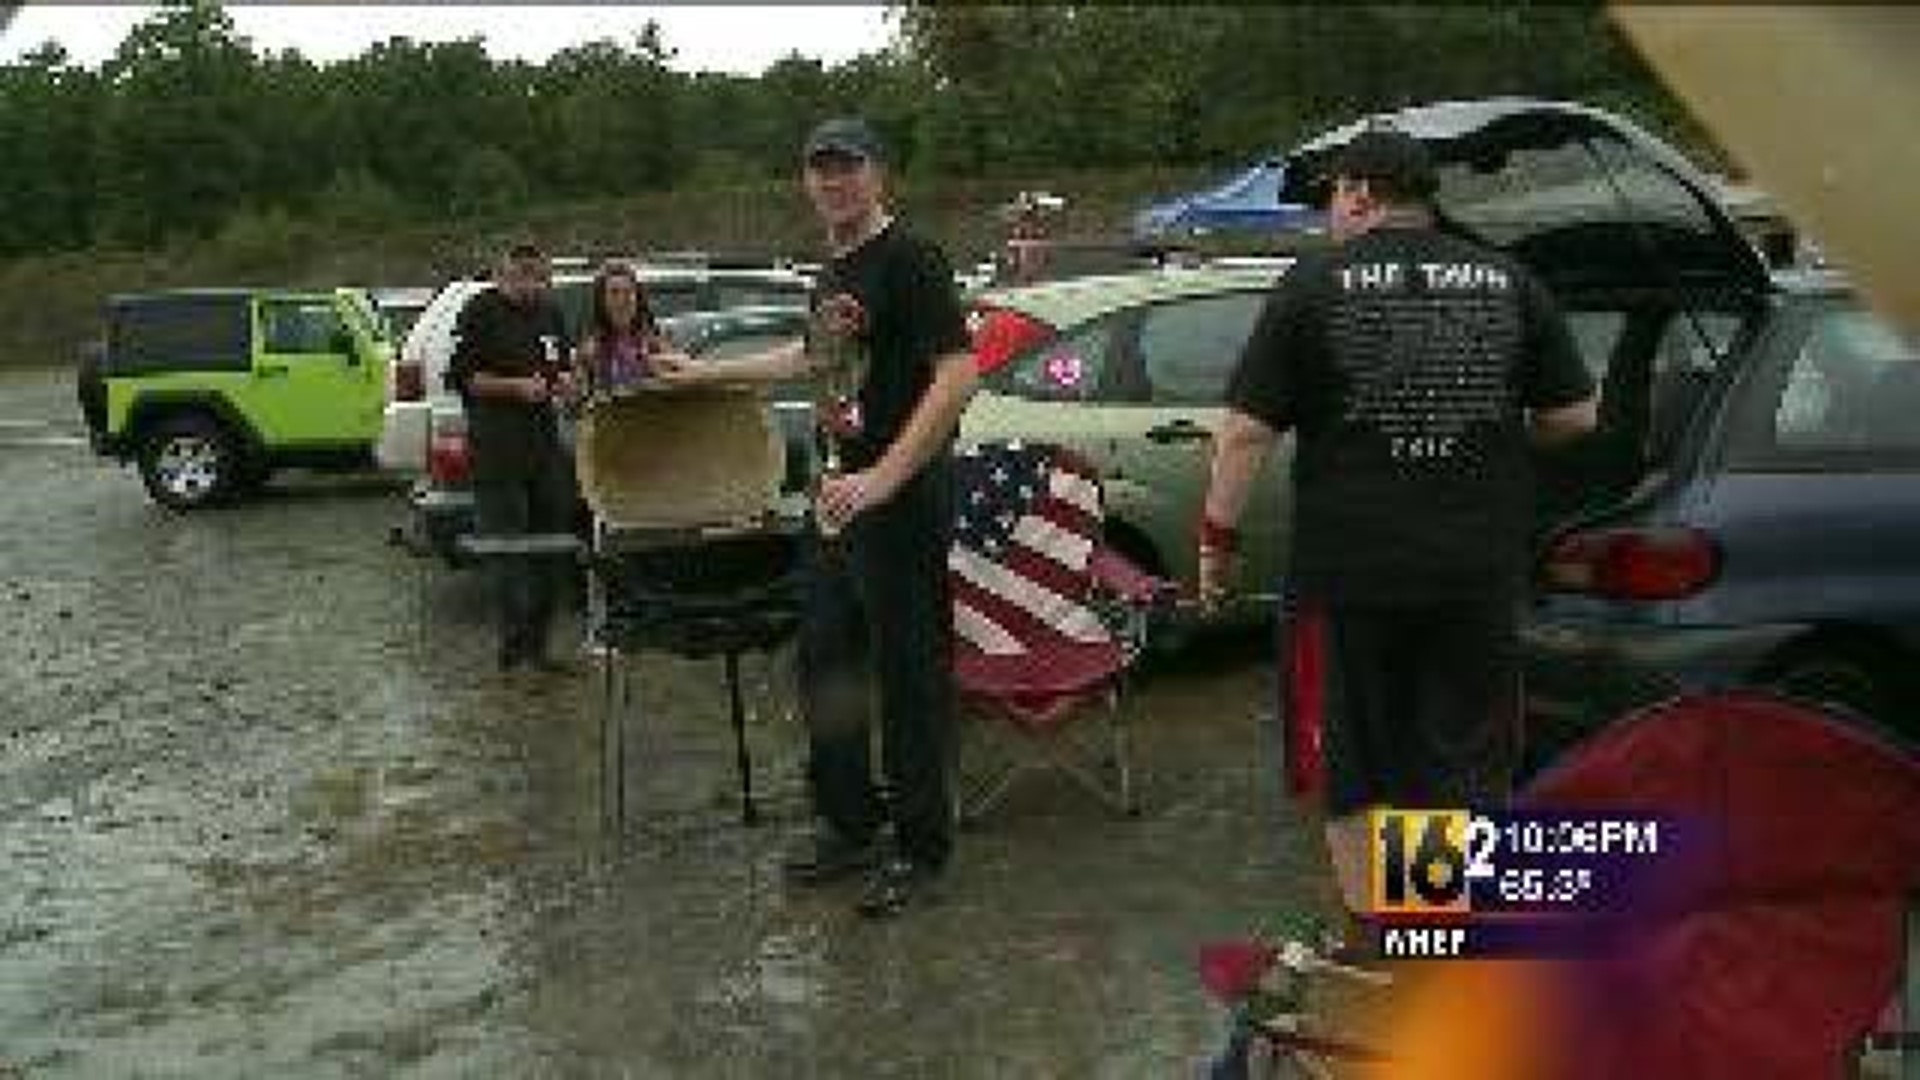 KISS, Mötley Crüe Fans Deal With Wet Weather